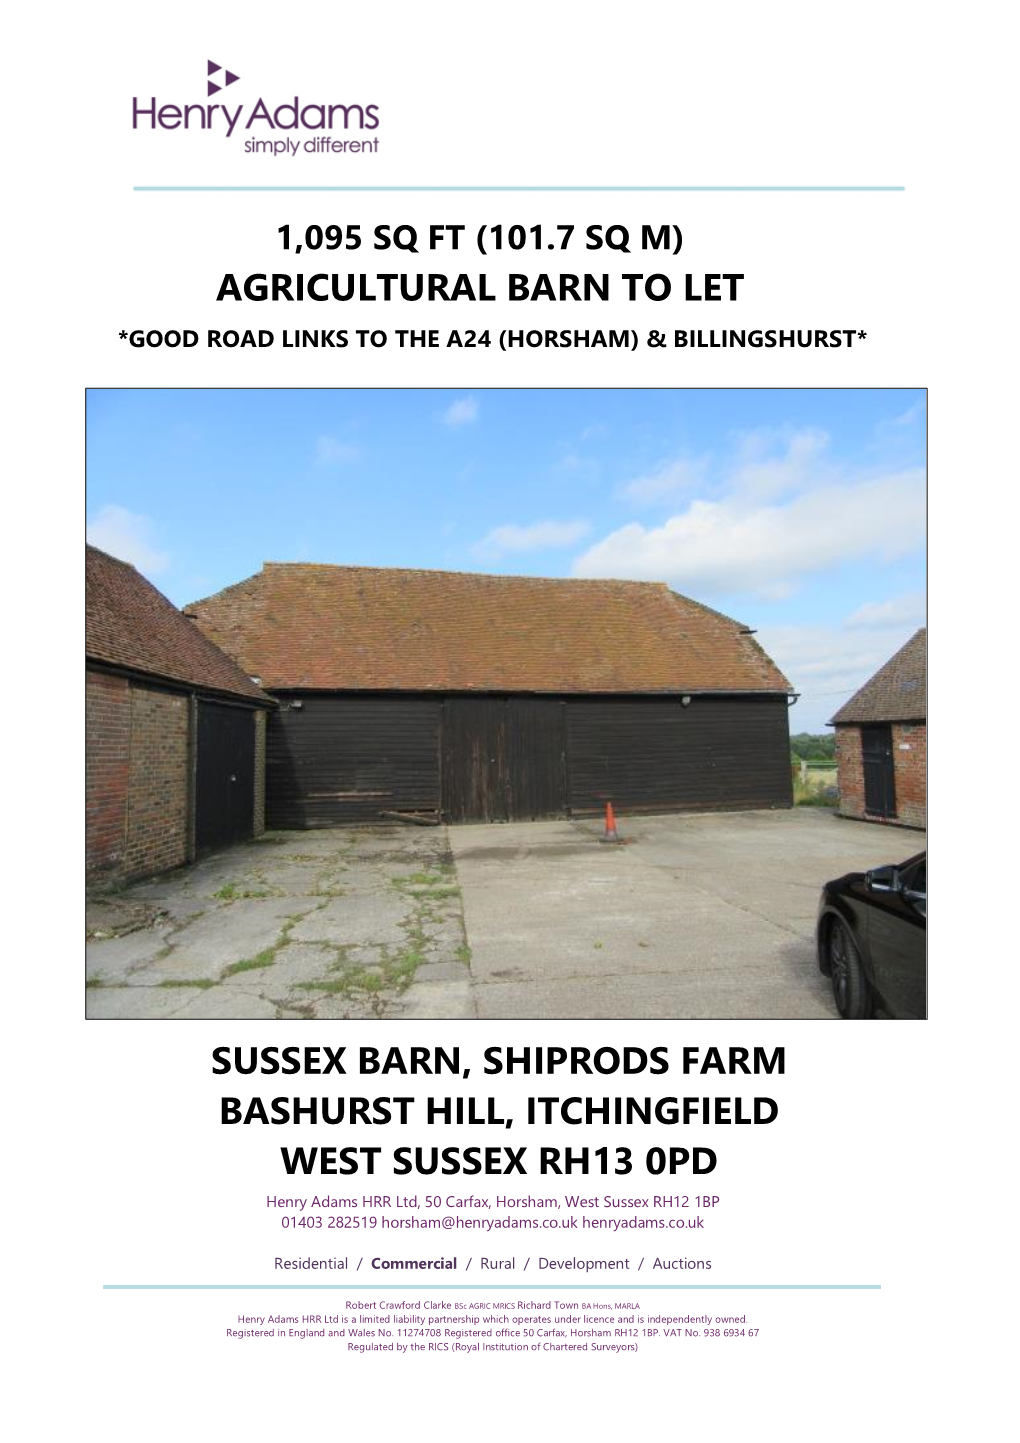 Agricultural Barn to Let Sussex Barn, Shiprods Farm